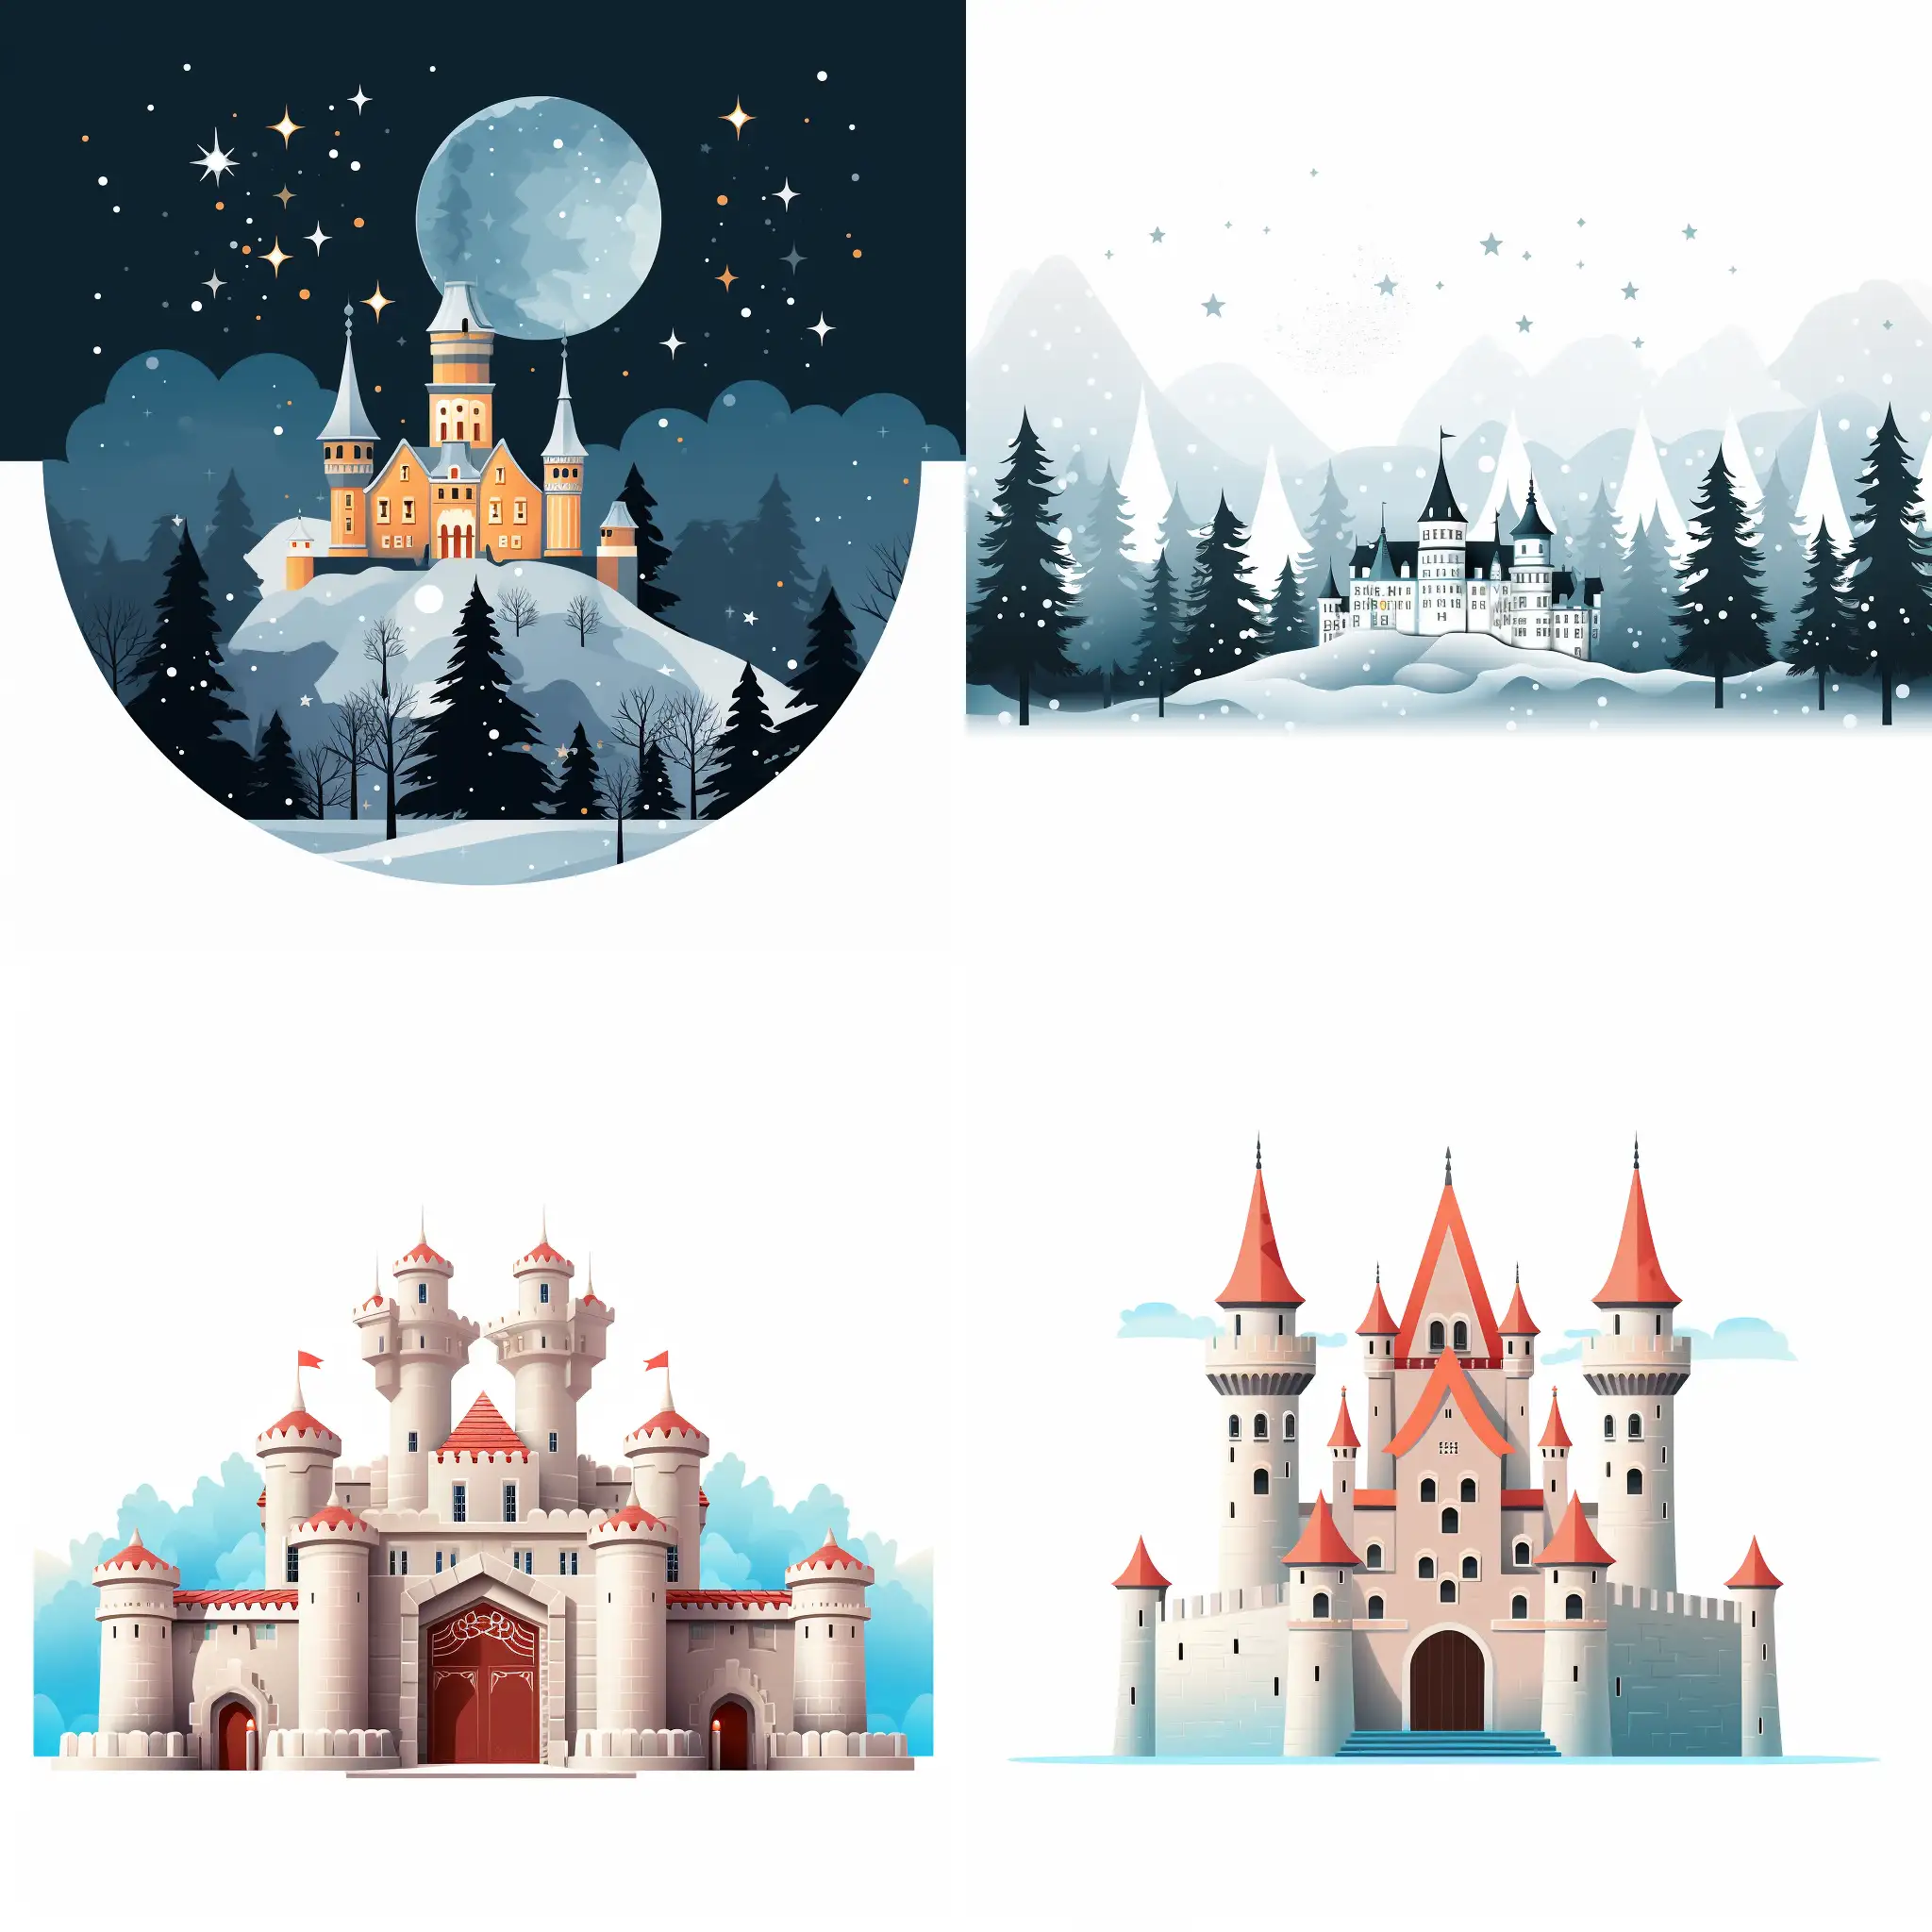 Castle, 8 p.m, brightly lit, white background picture, main body prominent, festive, in minimalistic vector style